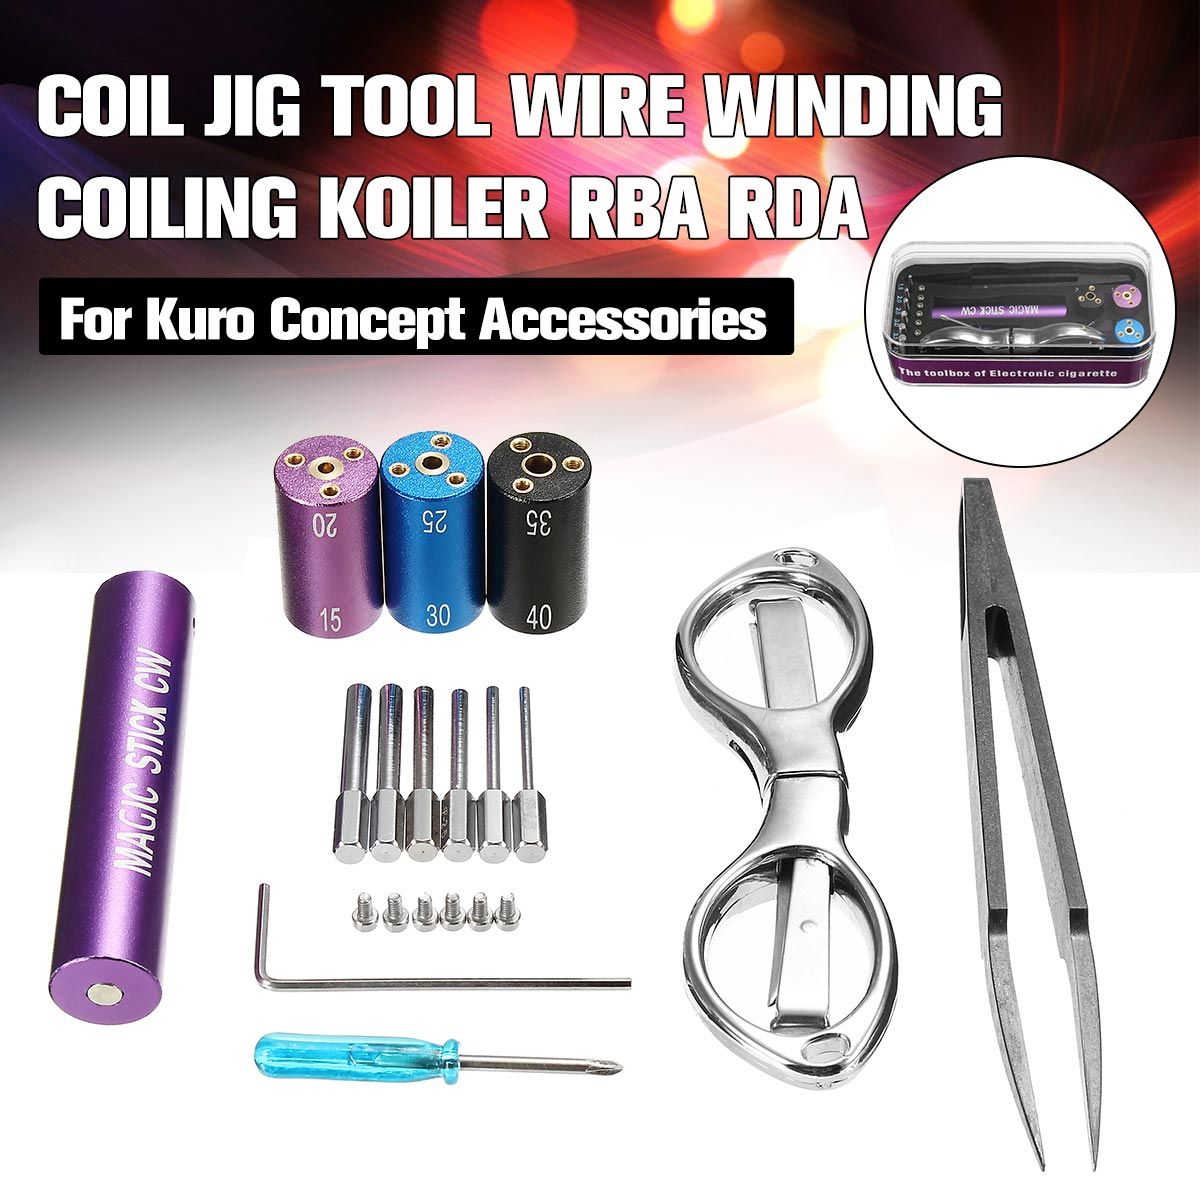 Atomizer-Coil-Jig-Tool-Wire-Winding-Coiling-Koiler-RBA-RDA-for-Kuro-Concept-Accessories-Motor-Wire-C-1285320